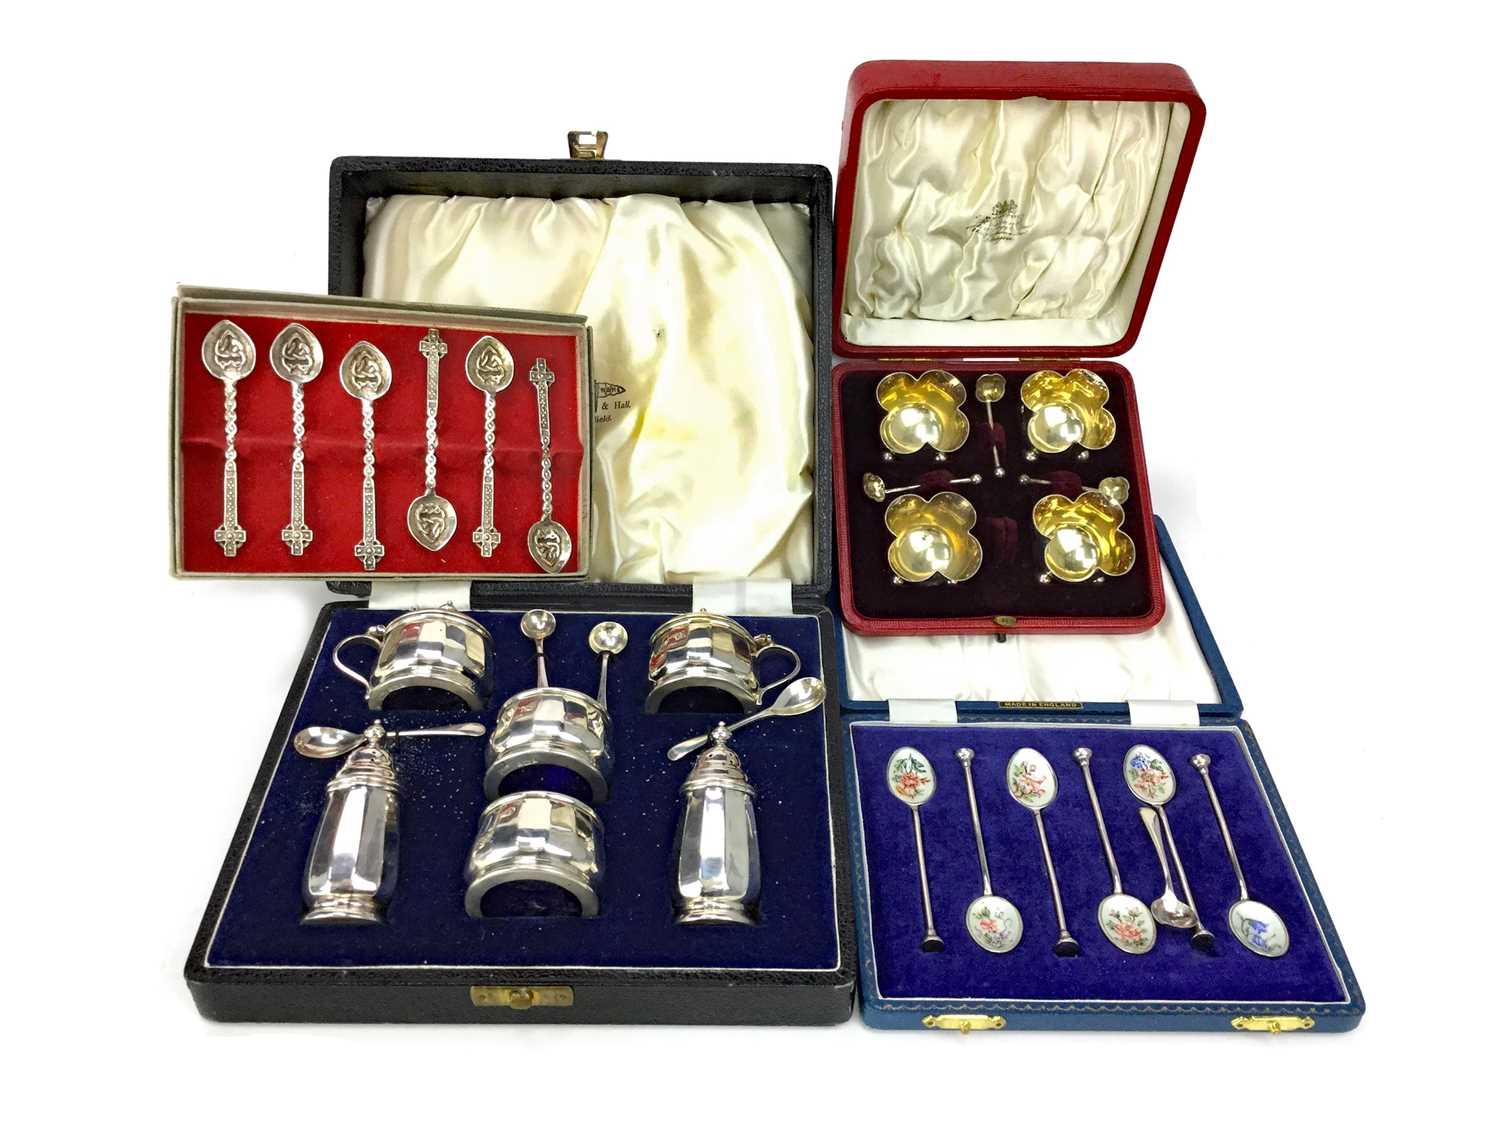 Lot 402 - A SILVER CRUET SET ALONG WITH A SALT SET AND TWO CASED SET OF SPOONS